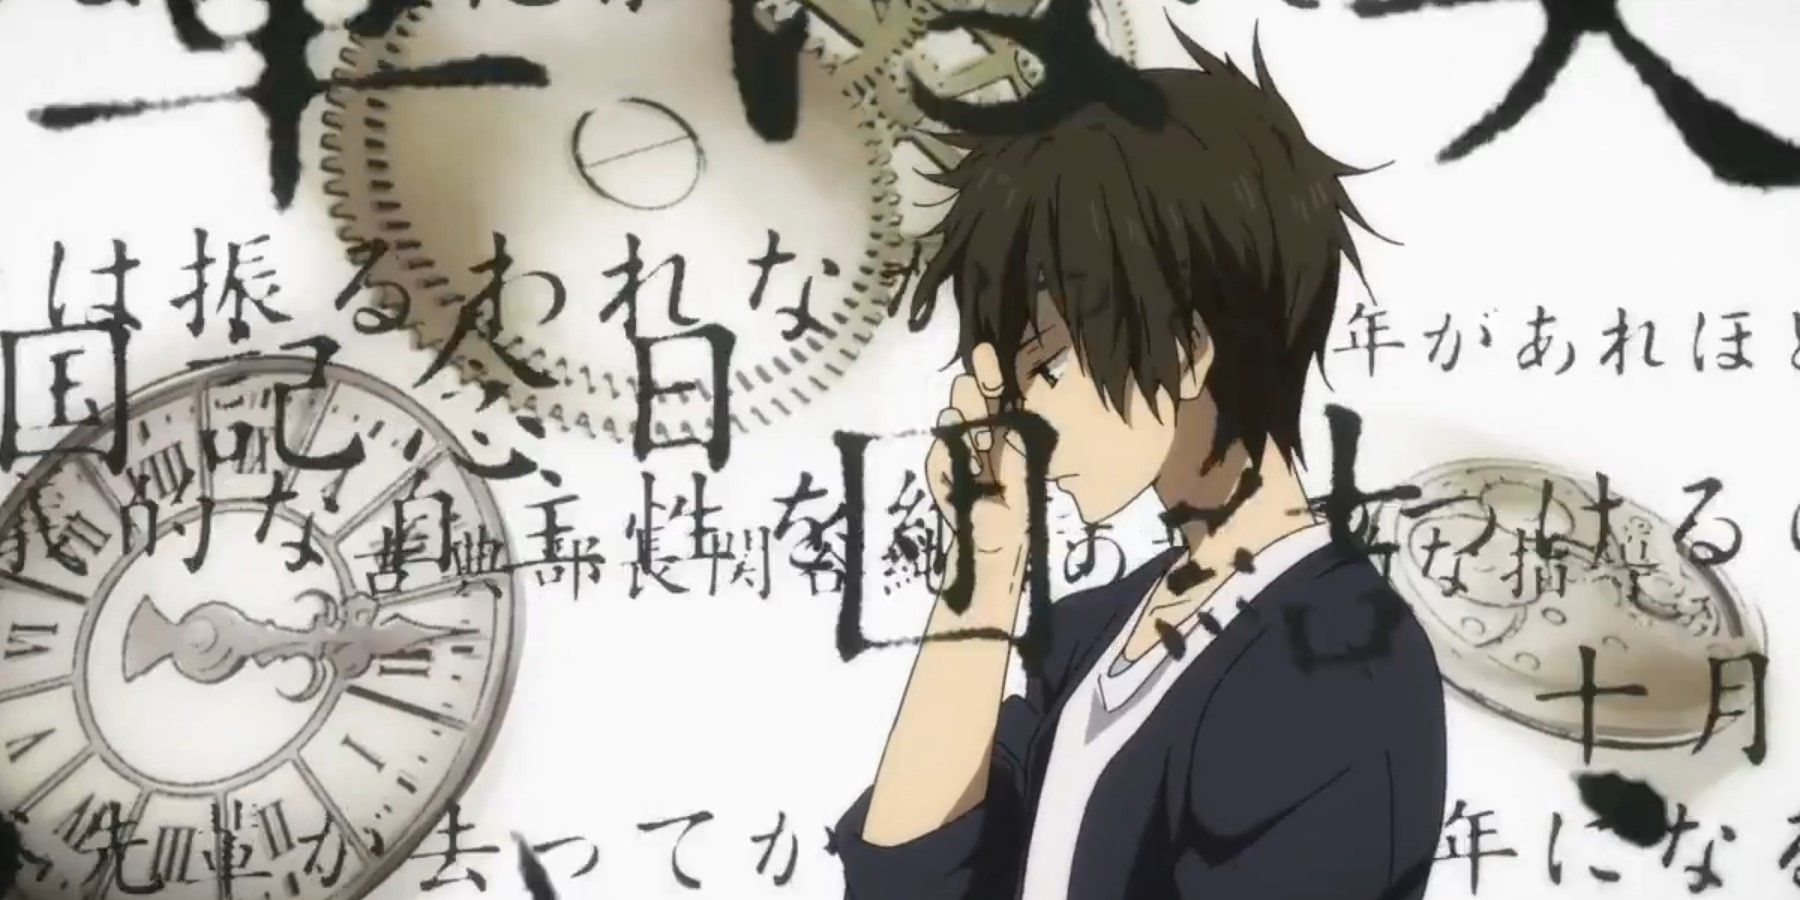 Hyouka Hotaro thinking as words, cogs, and clocks pass by